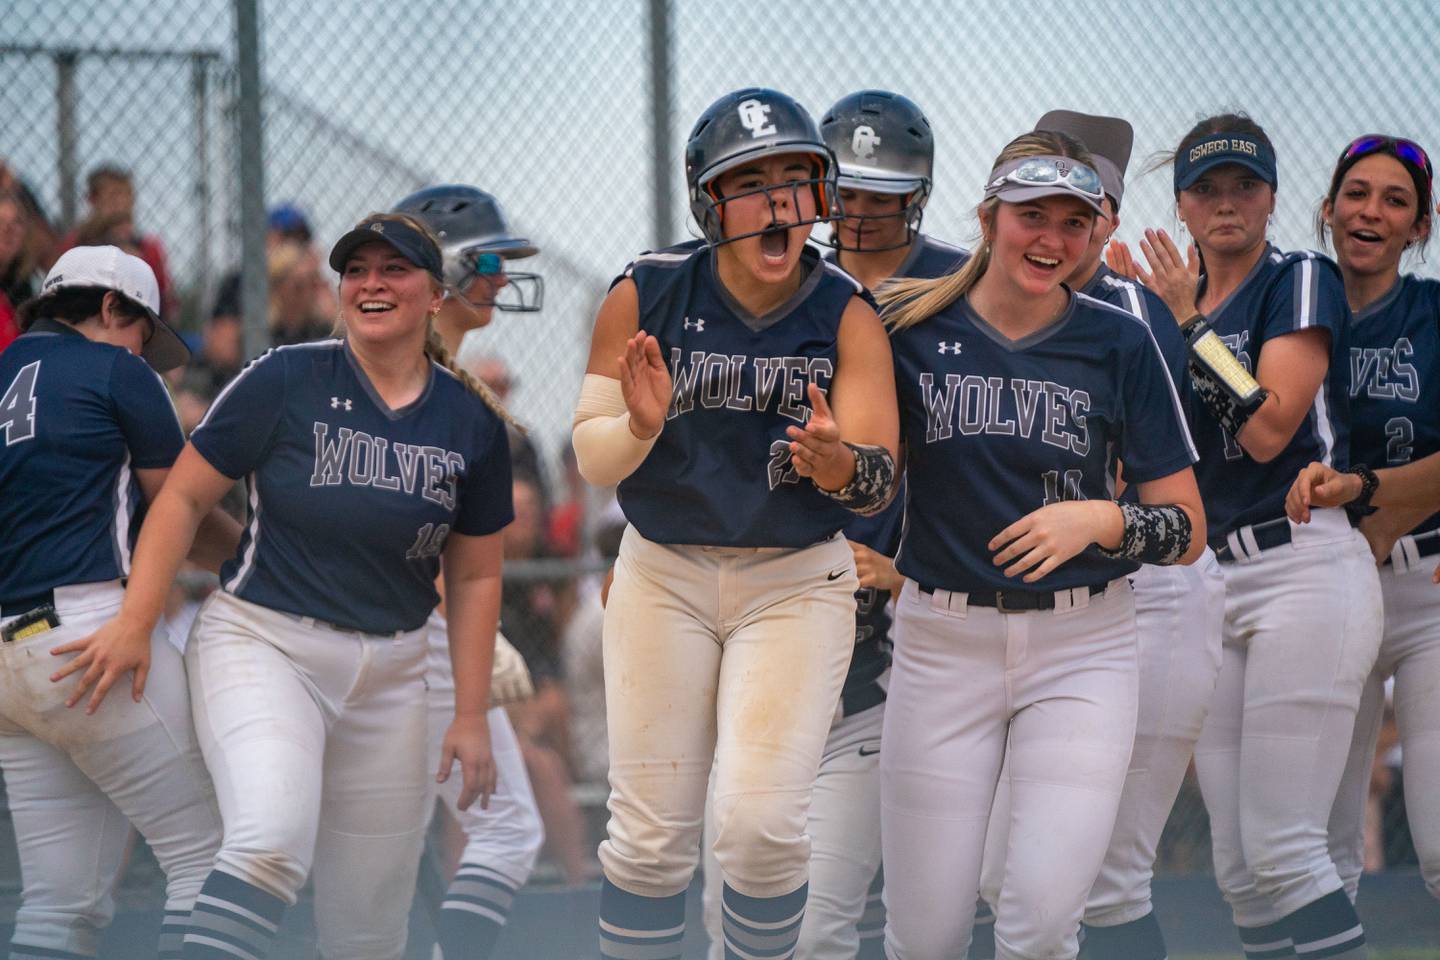 Oswego East's Mia Corres (21) reacts after homering against Yorkville during the Class 4A Oswego softball sectional semifinal game between Yorkville and Oswego East at Oswego High School on Tuesday, May 30, 2023.